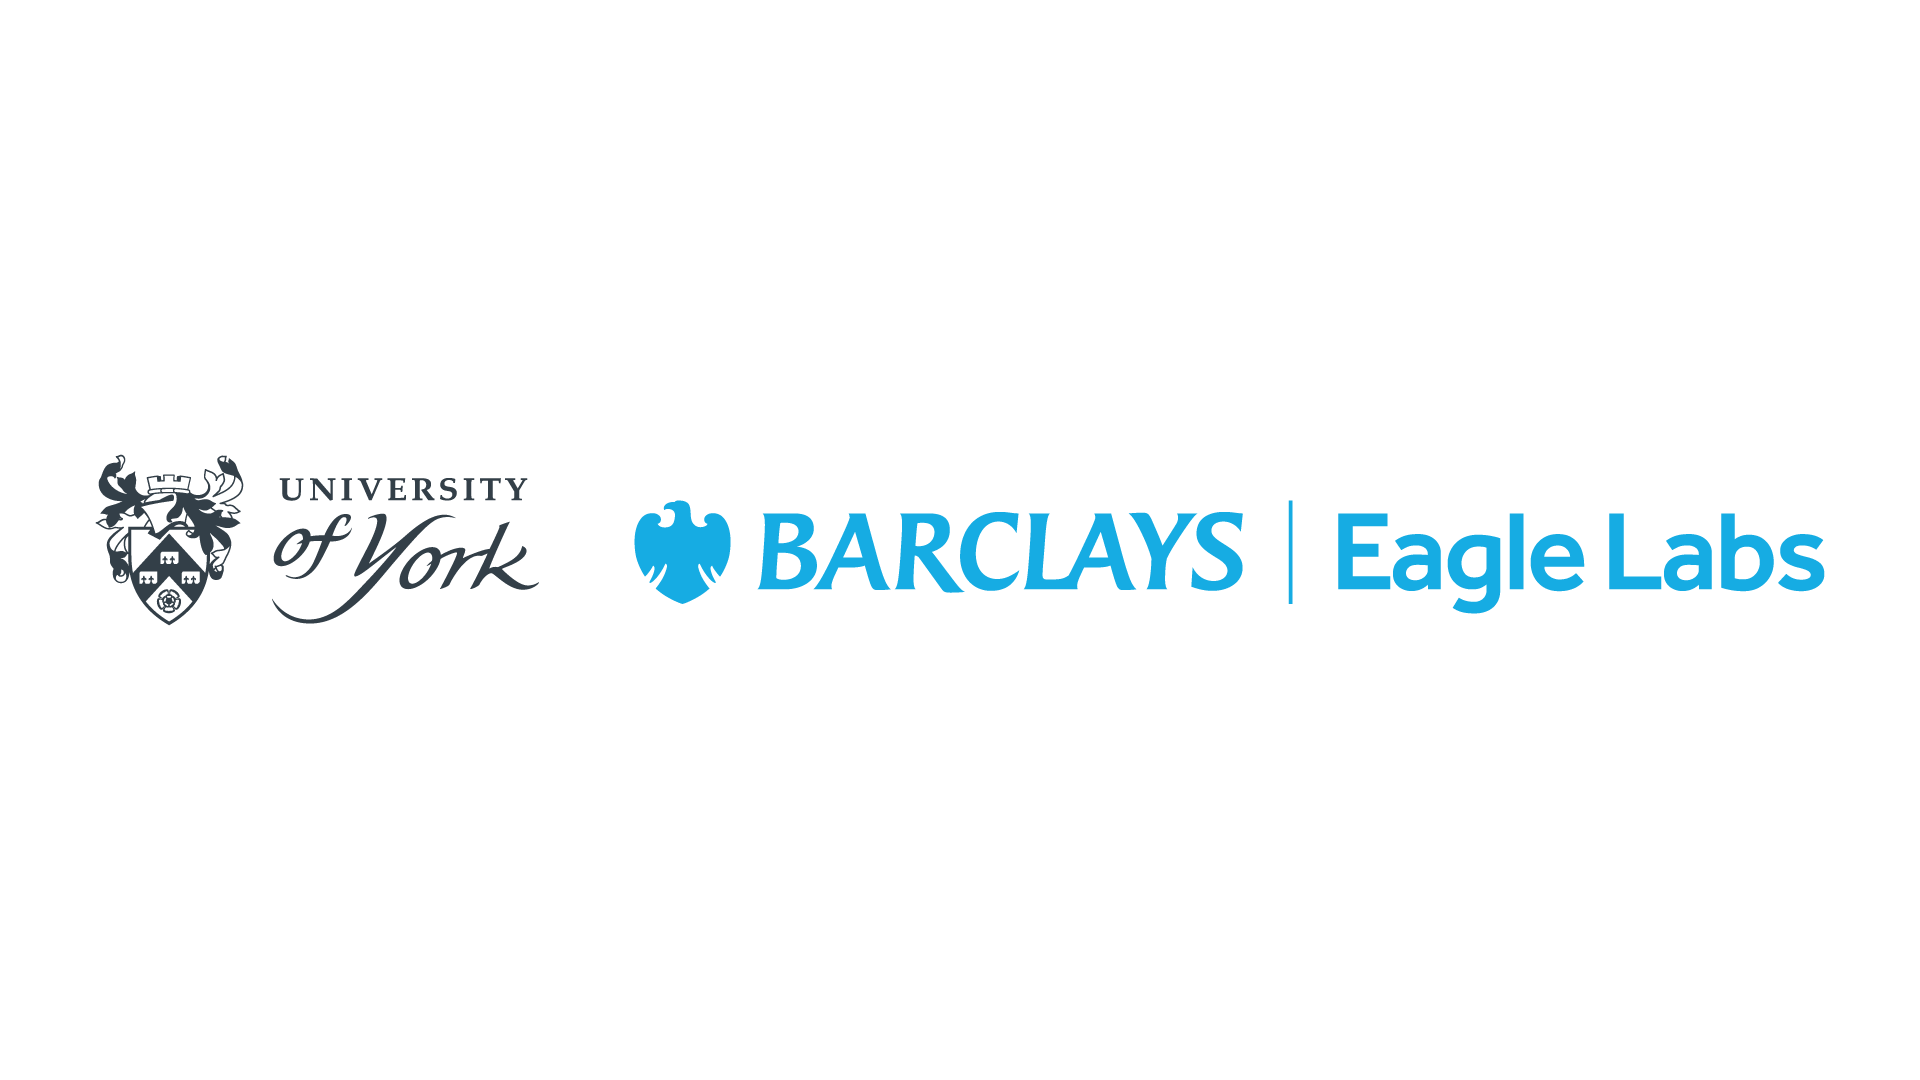 University of York - Barclays Eagle Labs